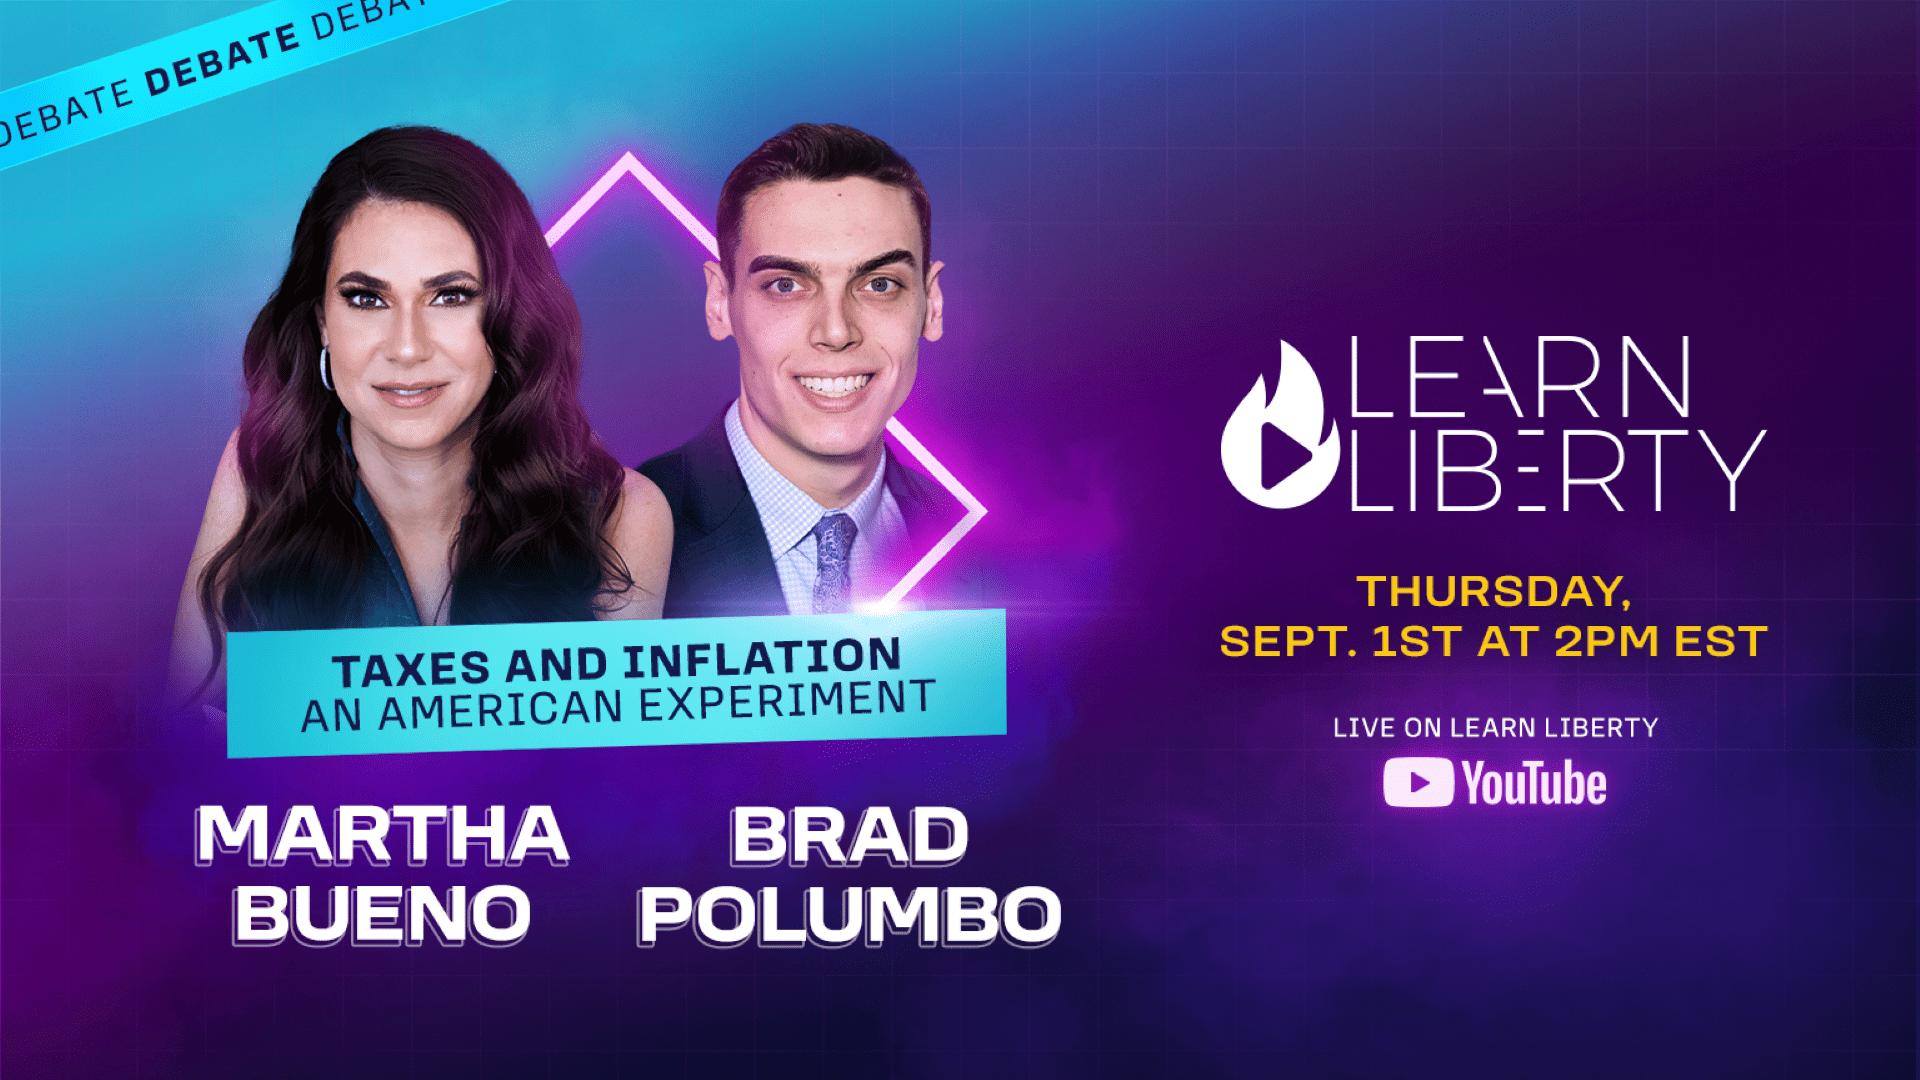 On Thursday, September 1 (2pm EST), we will host a live panel on Learn Liberty featuring Martha Bueno and Brad Polumbo discussing taxes and inflation